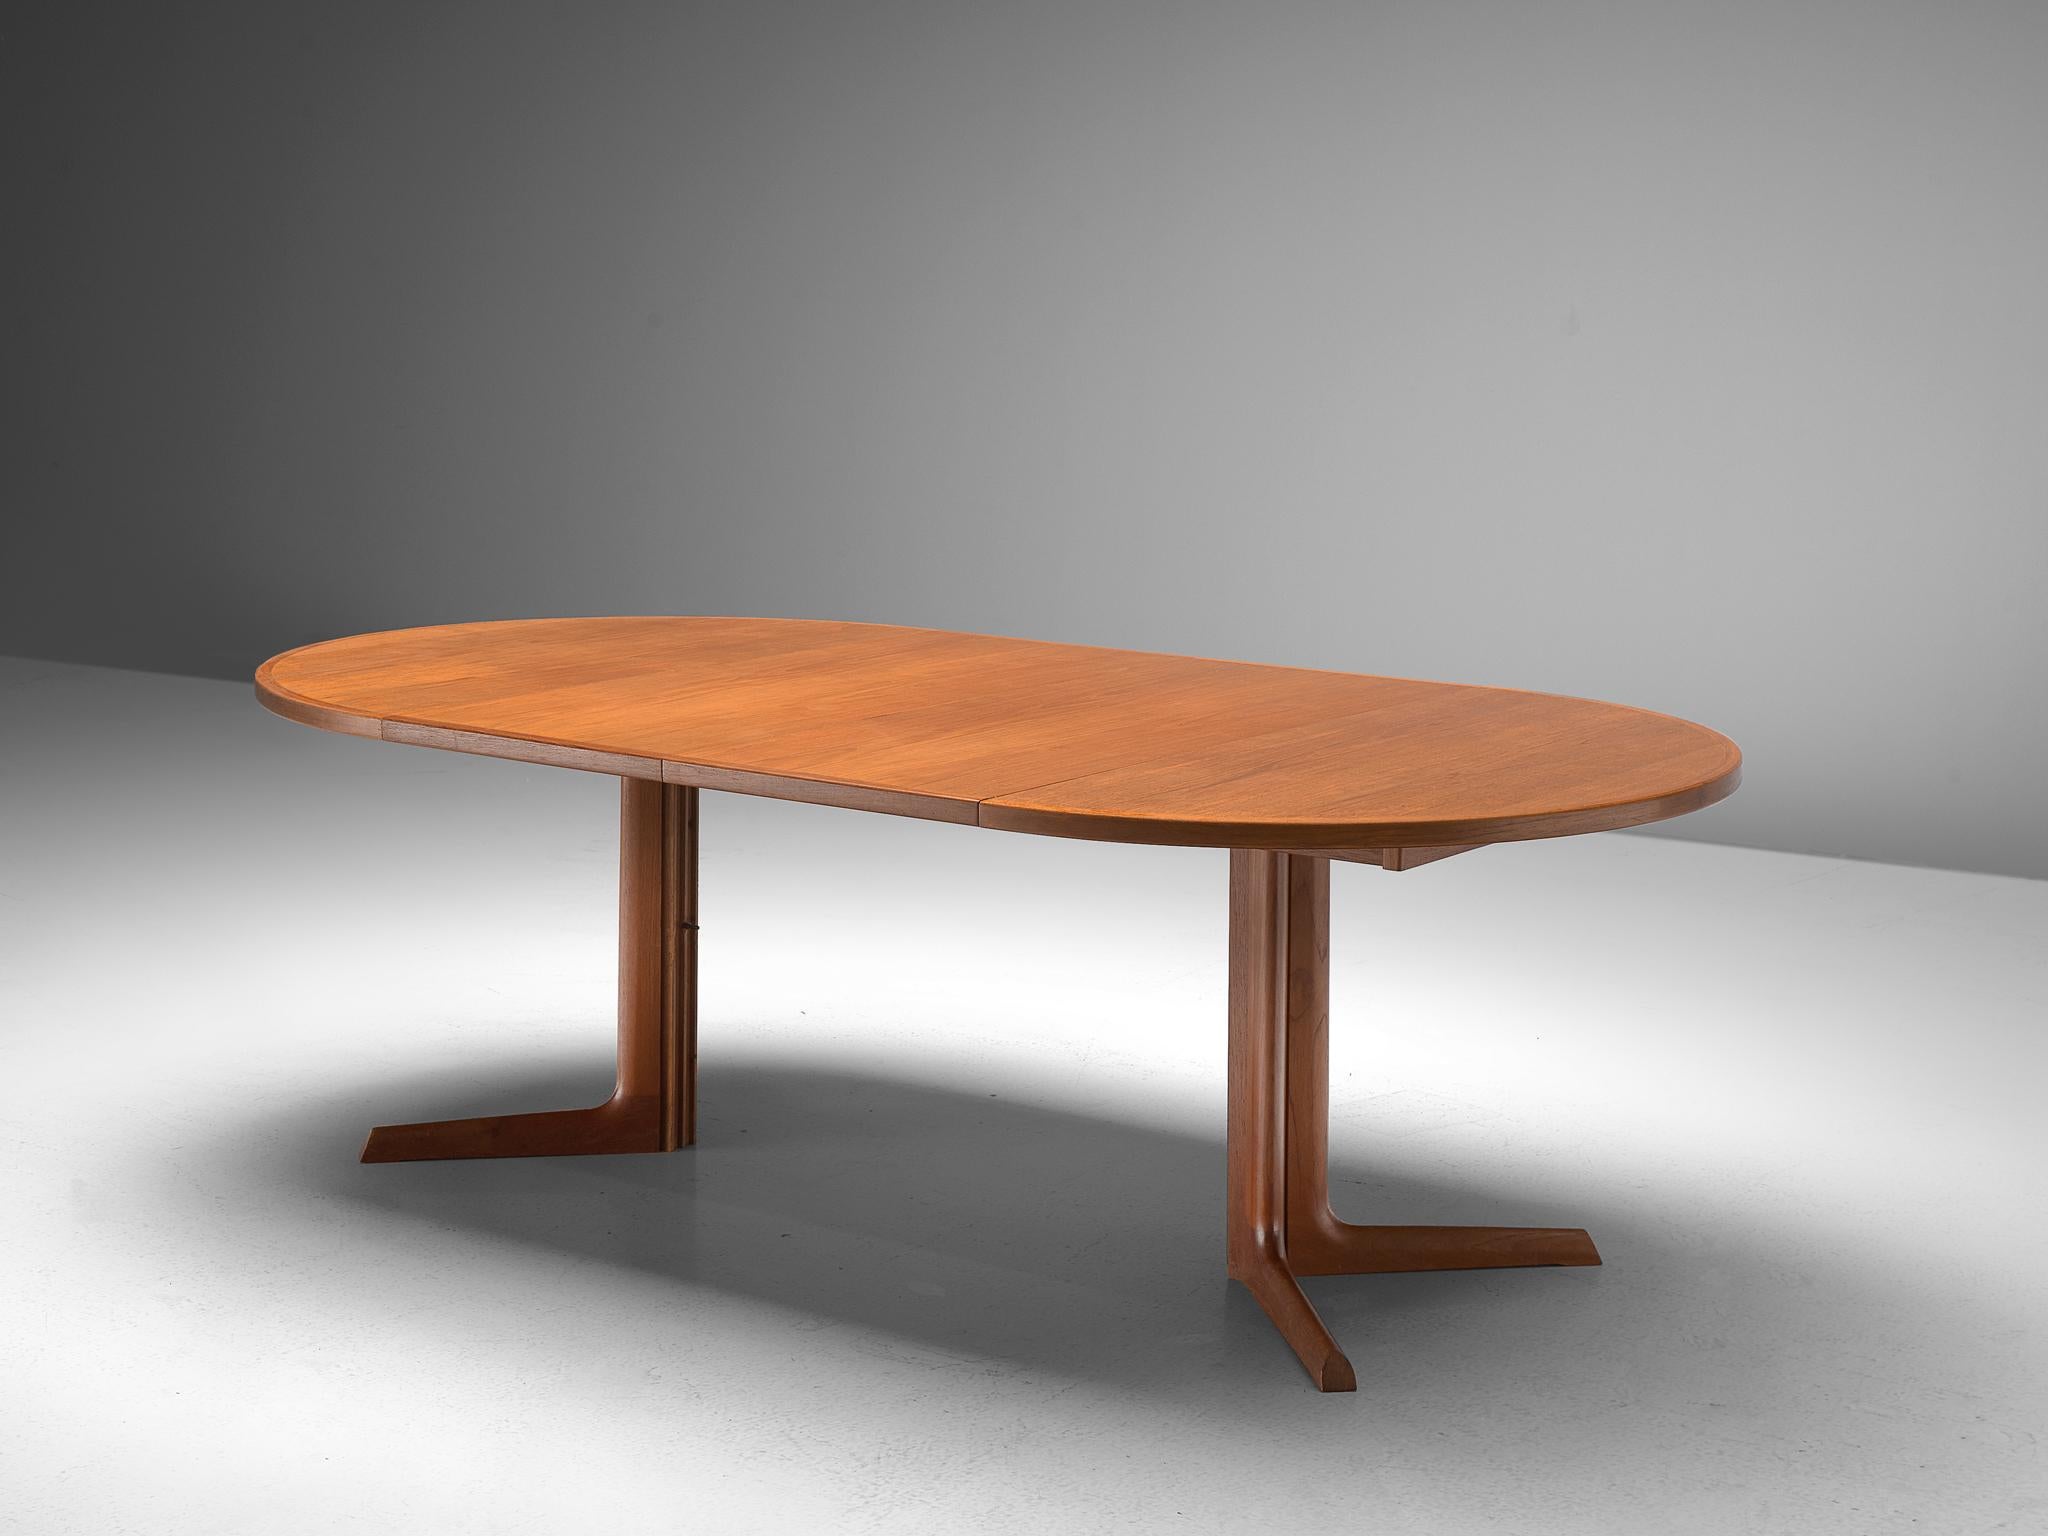 Niels Otto Møller, extendable dining table, teak, Denmark, 1950.

Scandinavian Modern round dining table by Niels O. Møller. The table comes with two additional leafs to make it an oval table of 86.3 inches wide. The table is modest and well